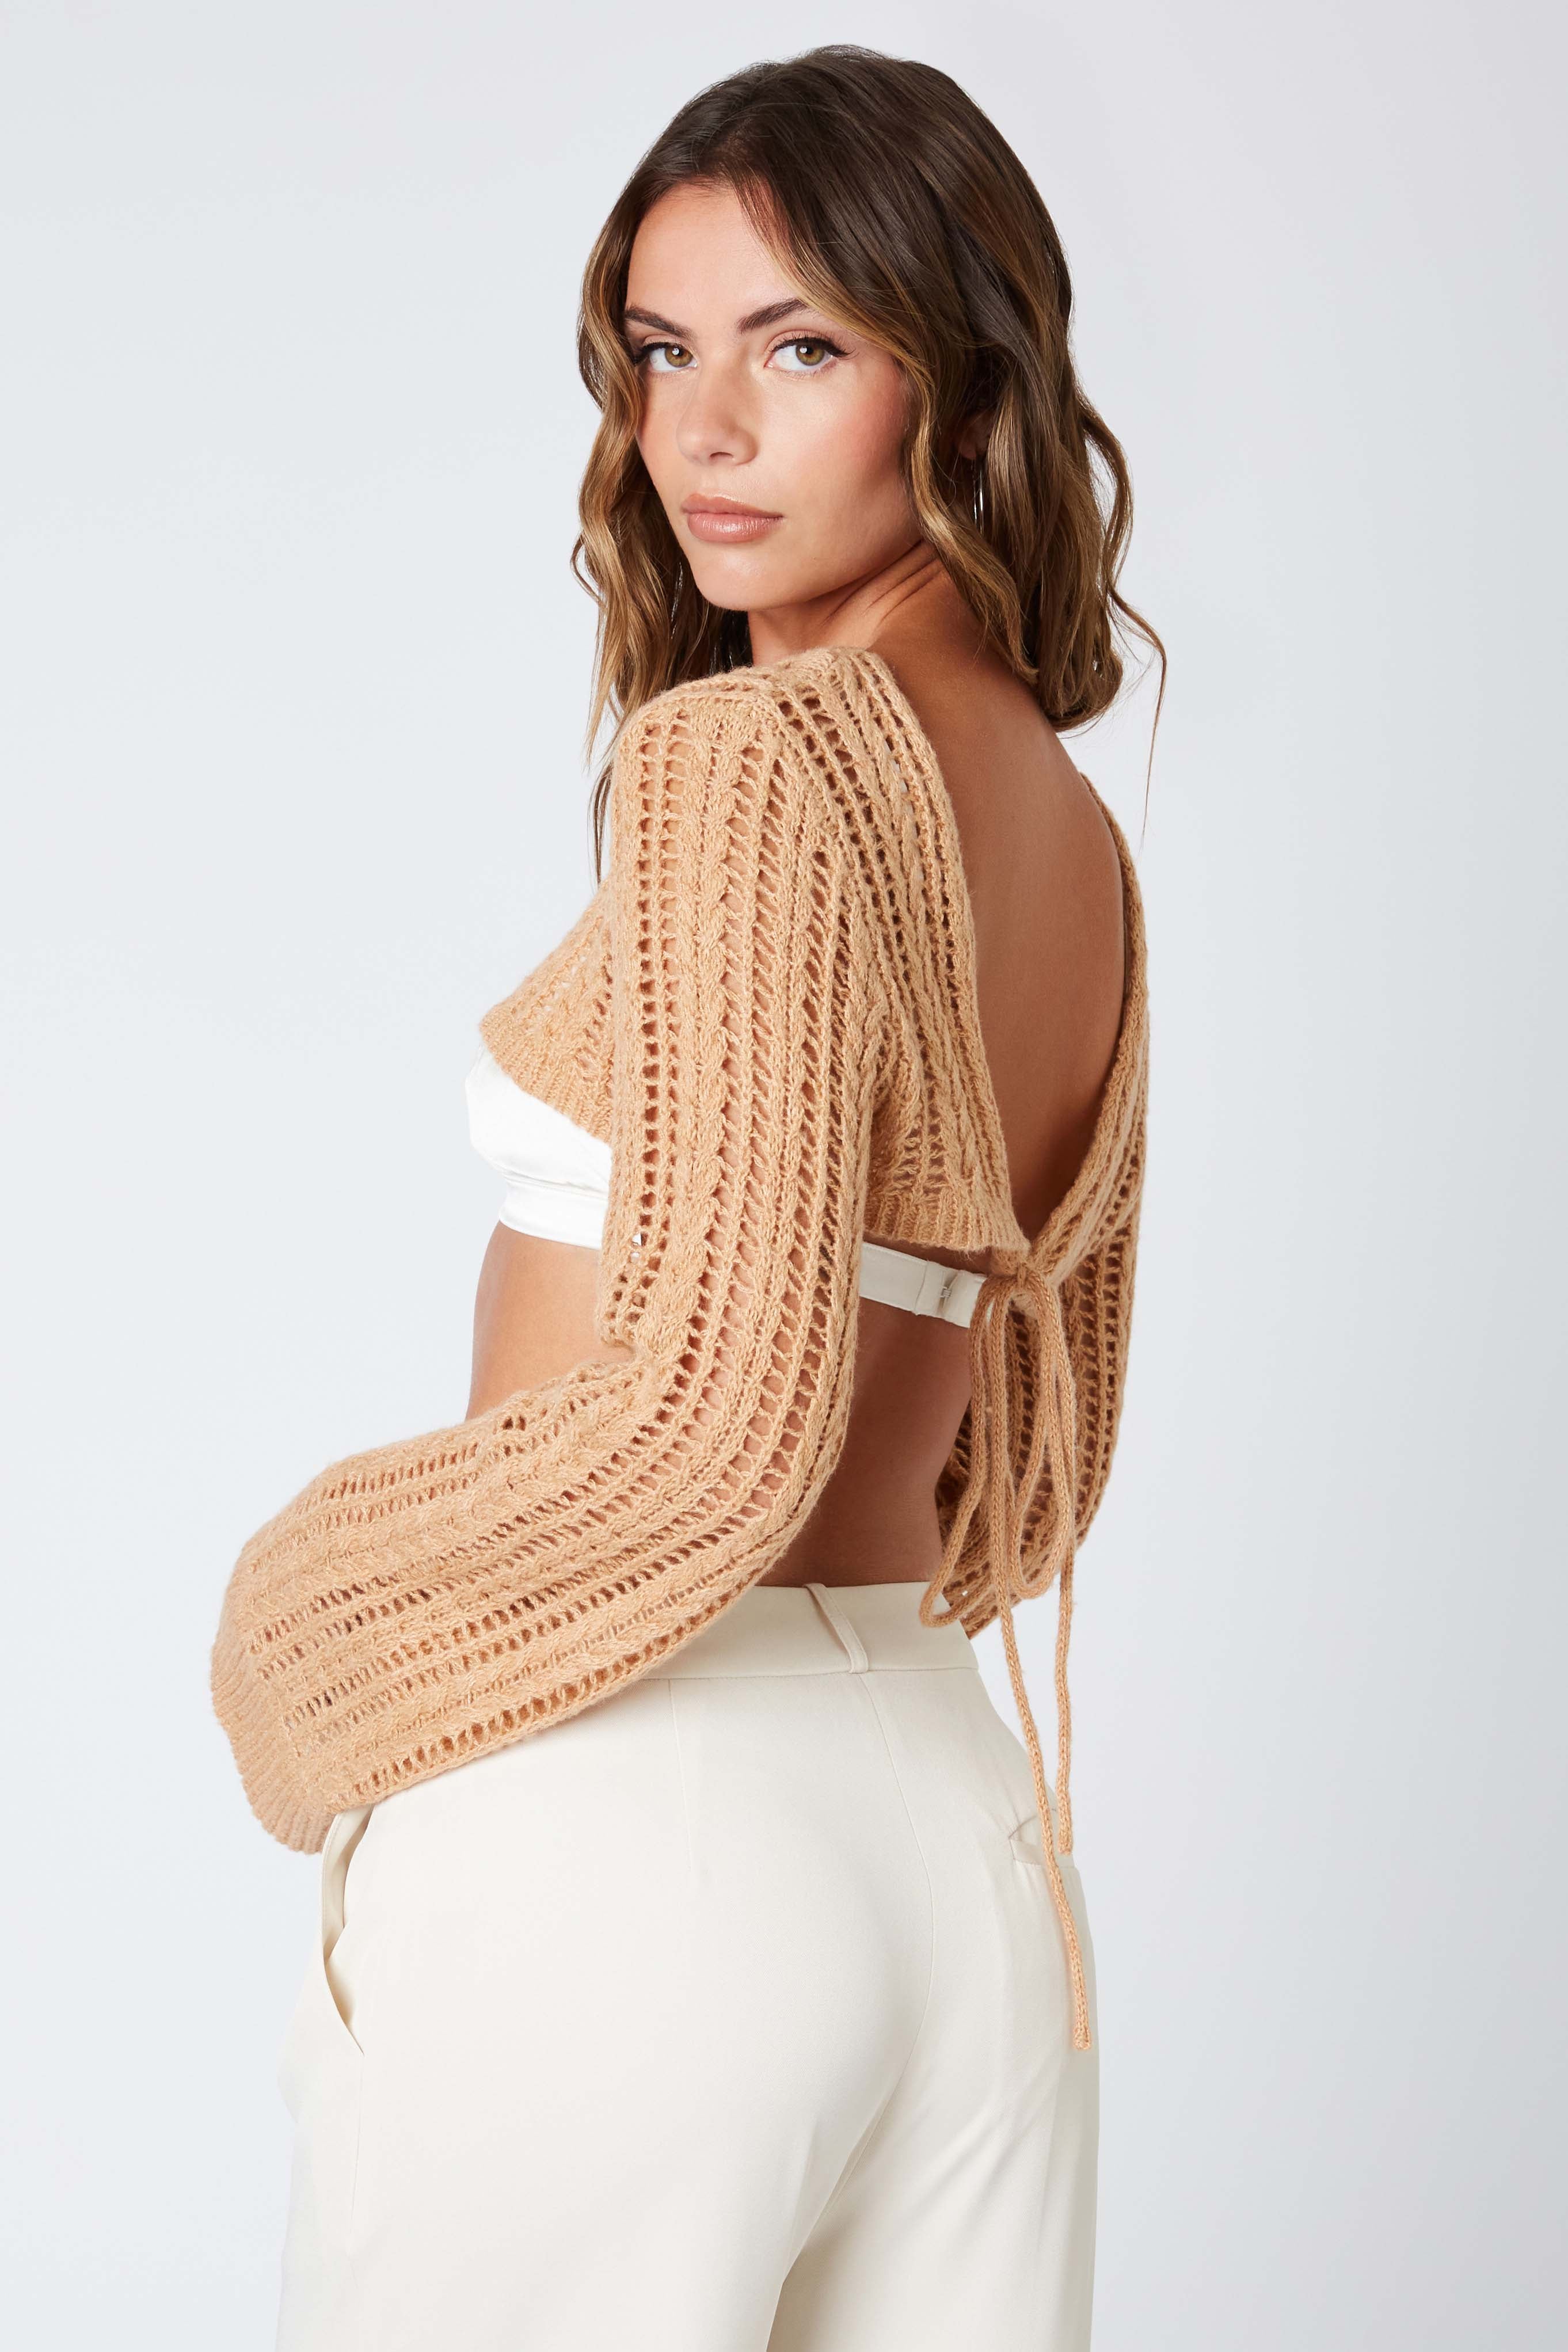 Open Knit Shrug in Caramel Back View